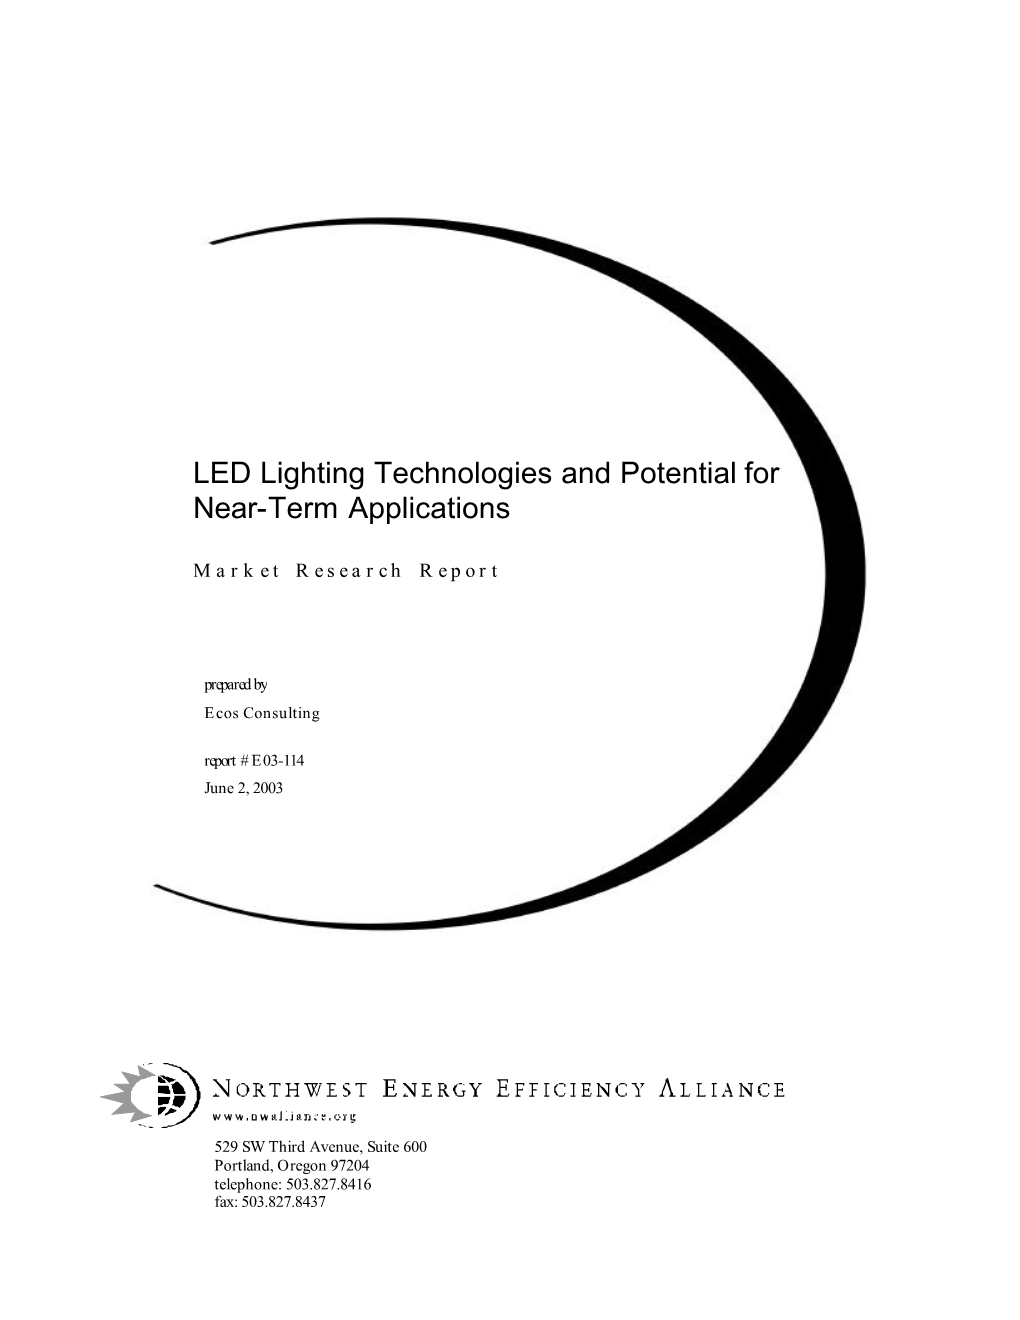 LED Lighting Technologies and Potential for Near-Term Applications